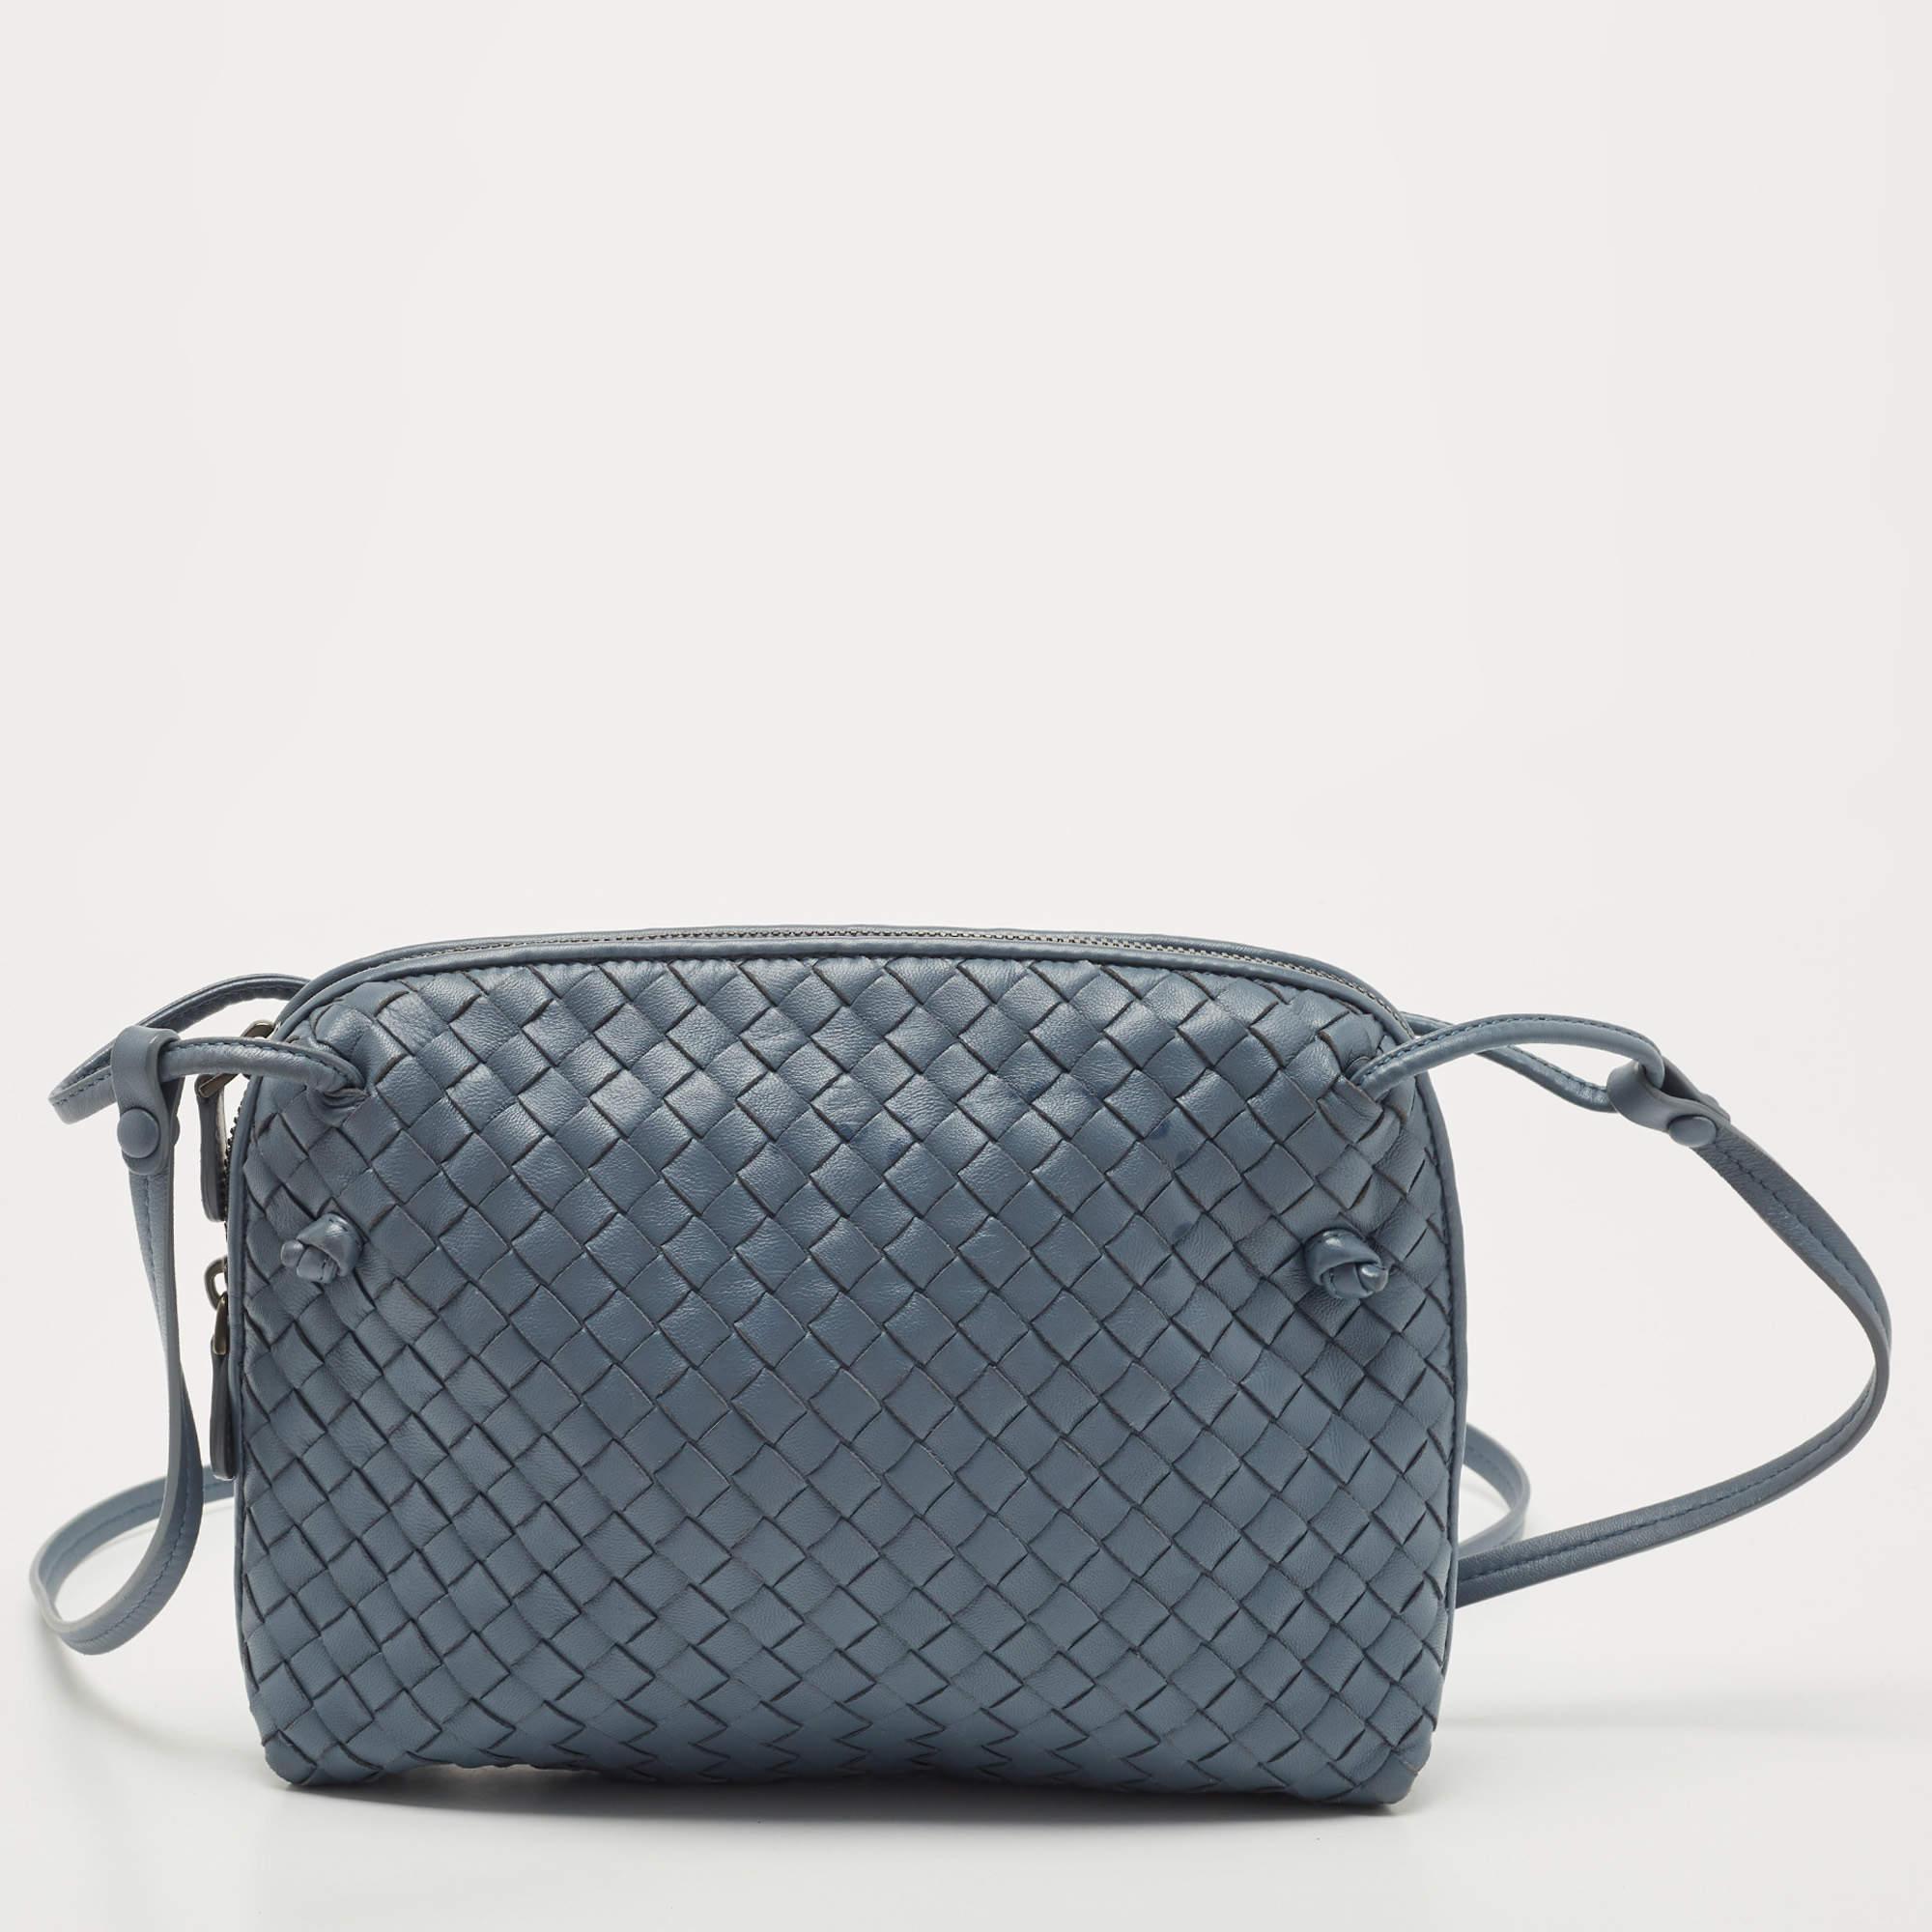 Swap that regular everyday tote with this charming crossbody bag from the house of Bottega Veneta. Sewn and assembled with care and love, the bag promises to boost your style and hold your daily essentials with great ease.

Includes: Info Booklet,